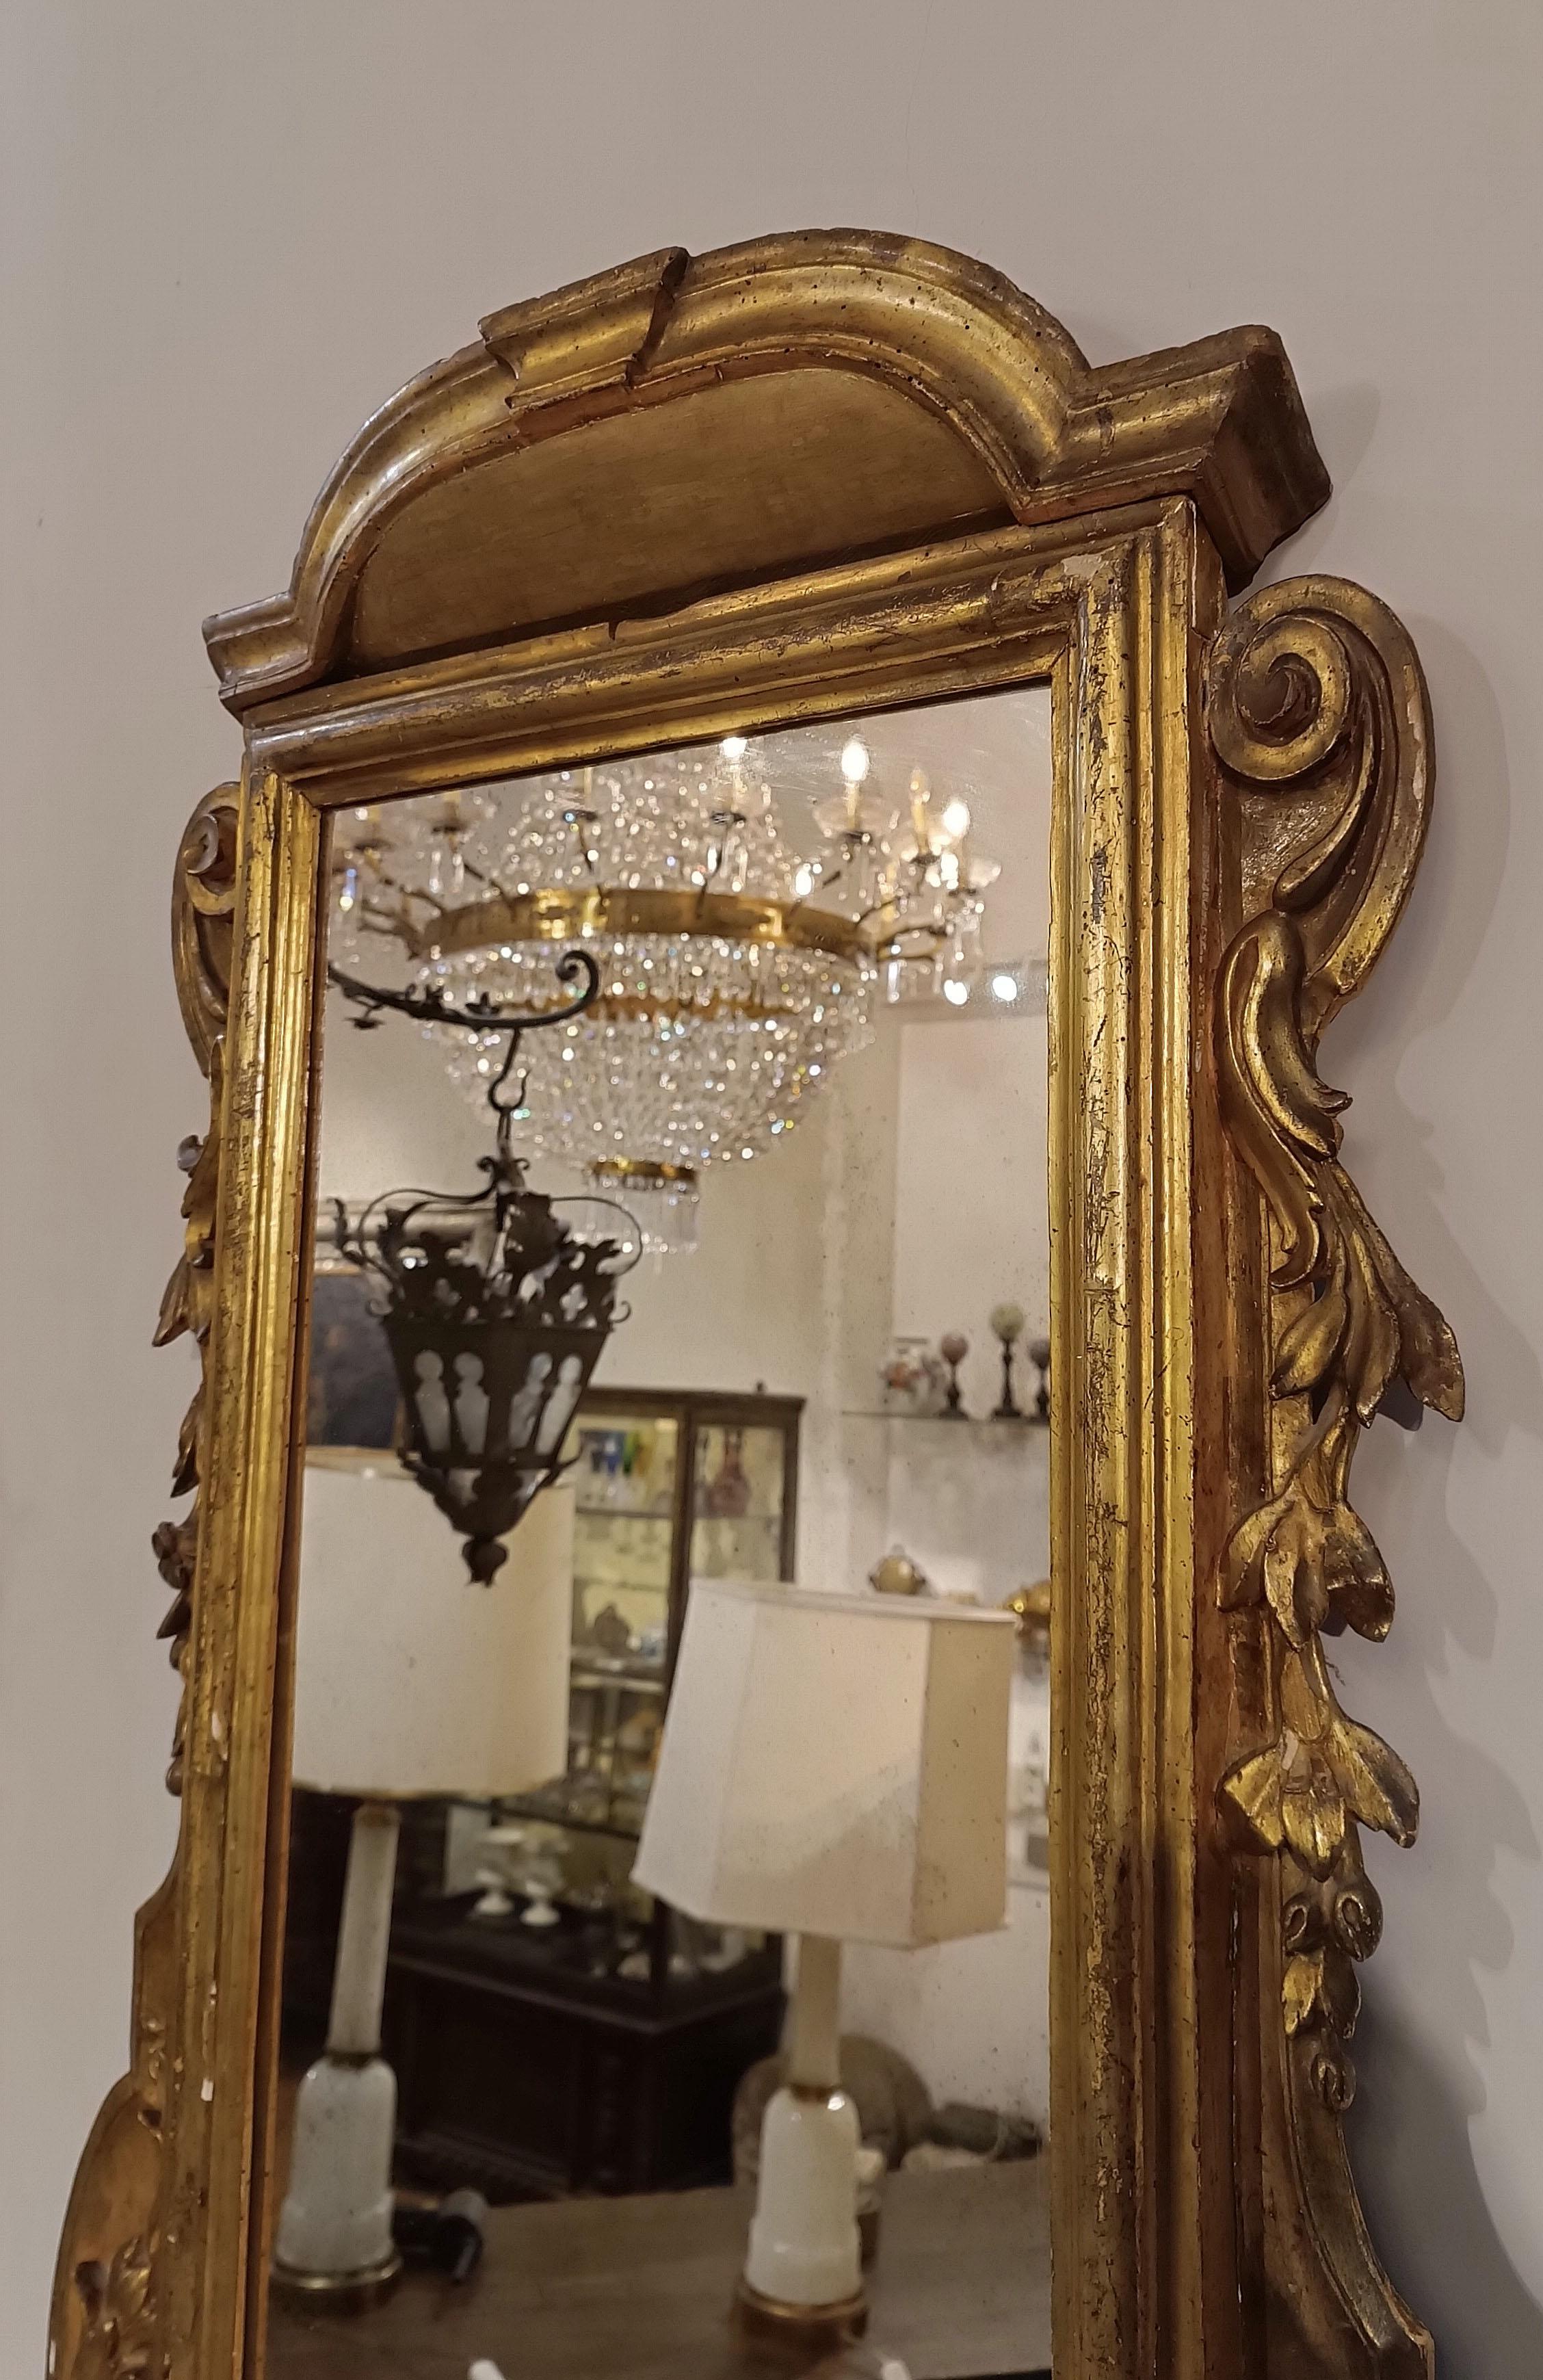 SECOND HALF OF THE 18th CENTURY SMALL MIRROR IN GOLDEN WOOD  For Sale 1